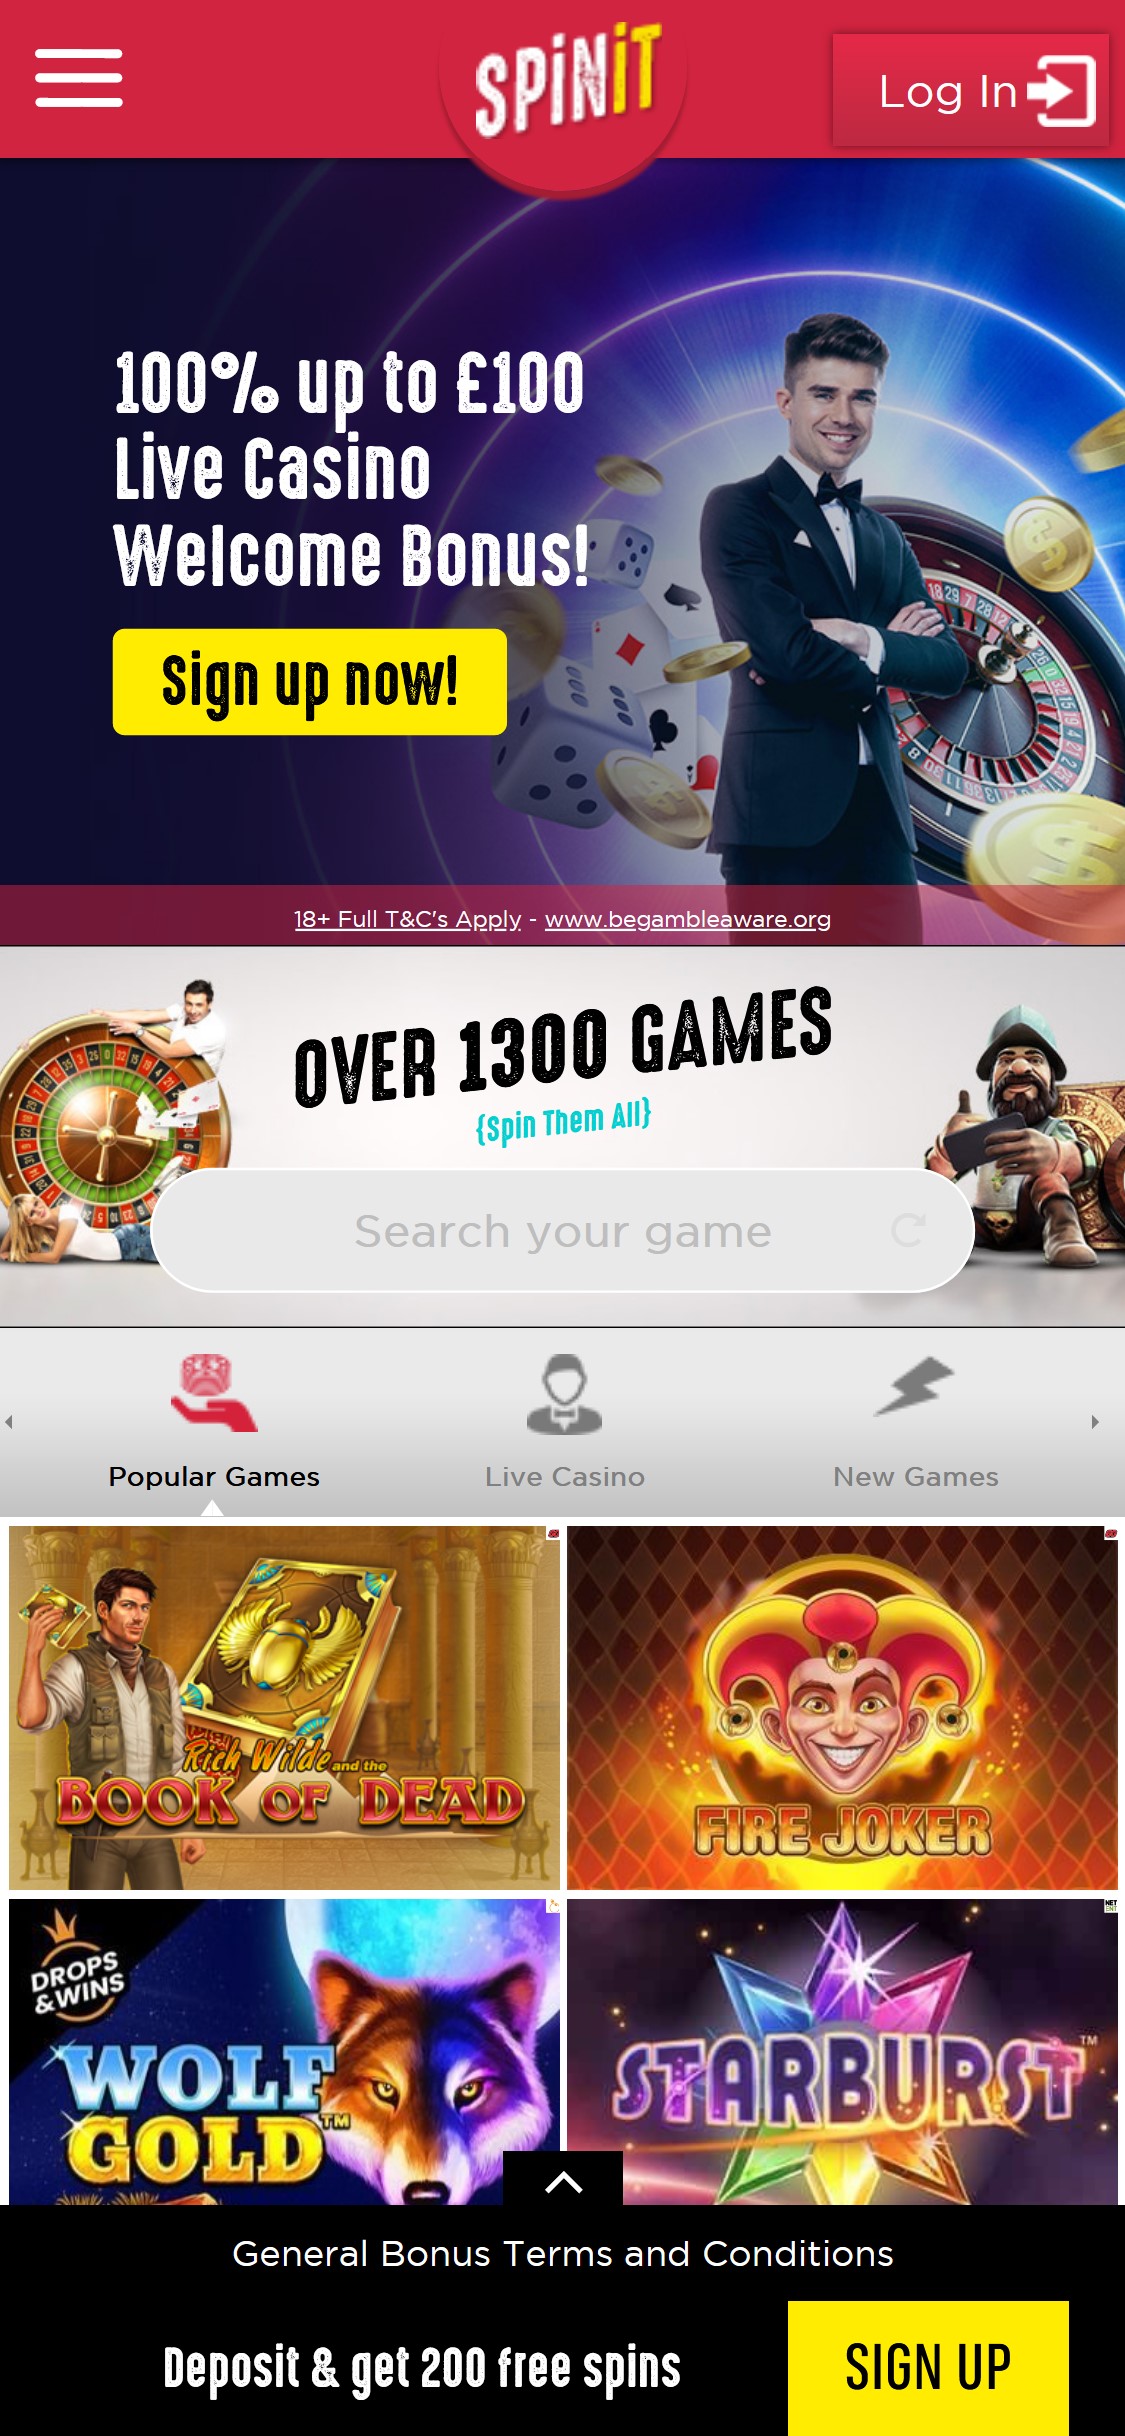 SpinIt Casino Mobile Review